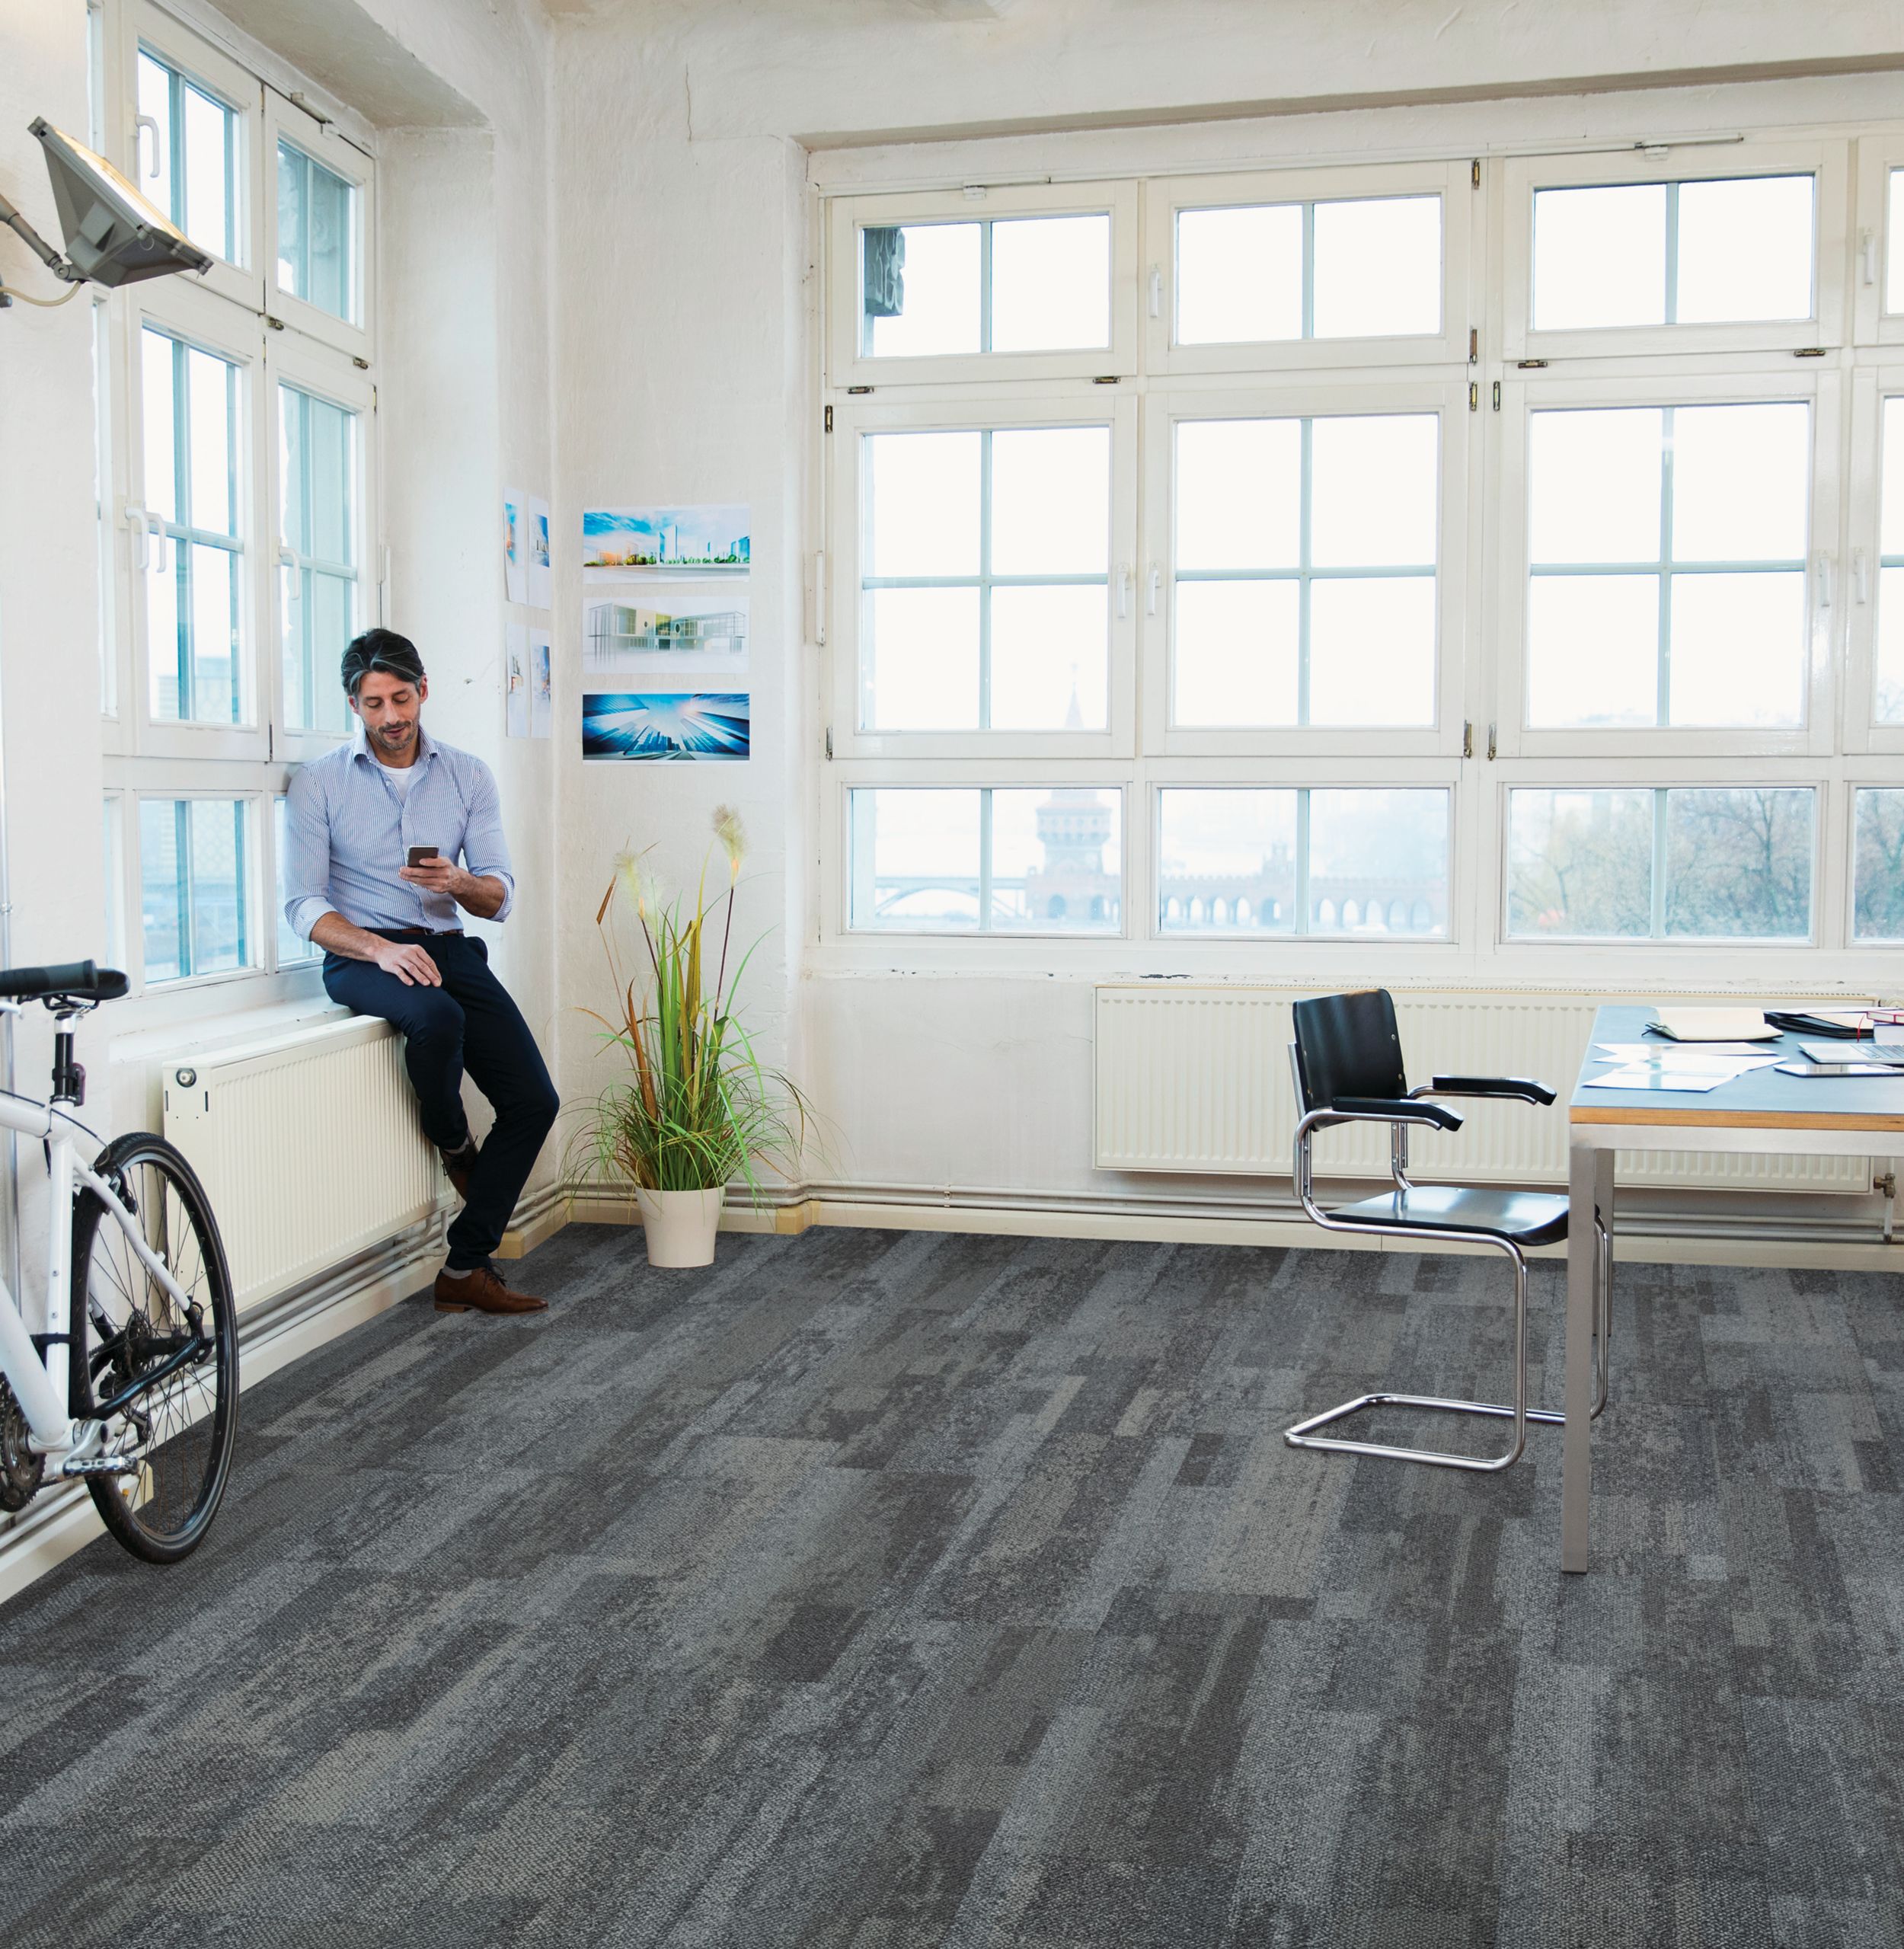 Interface Naturally Weathered plank carpet tile in office space with man looking at phone on window sill imagen número 5